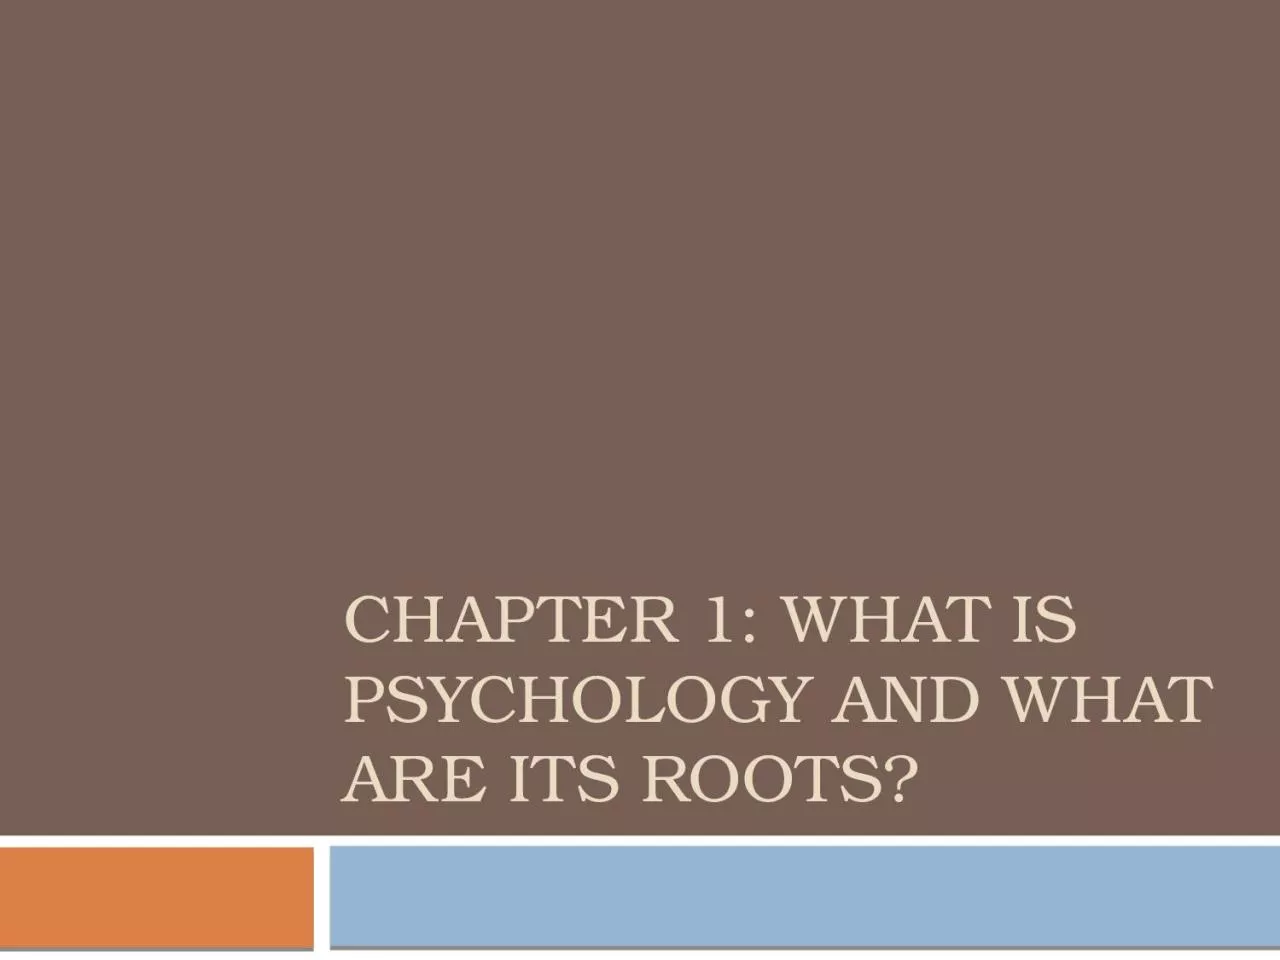 Chapter 1: What is Psychology and what are its roots?